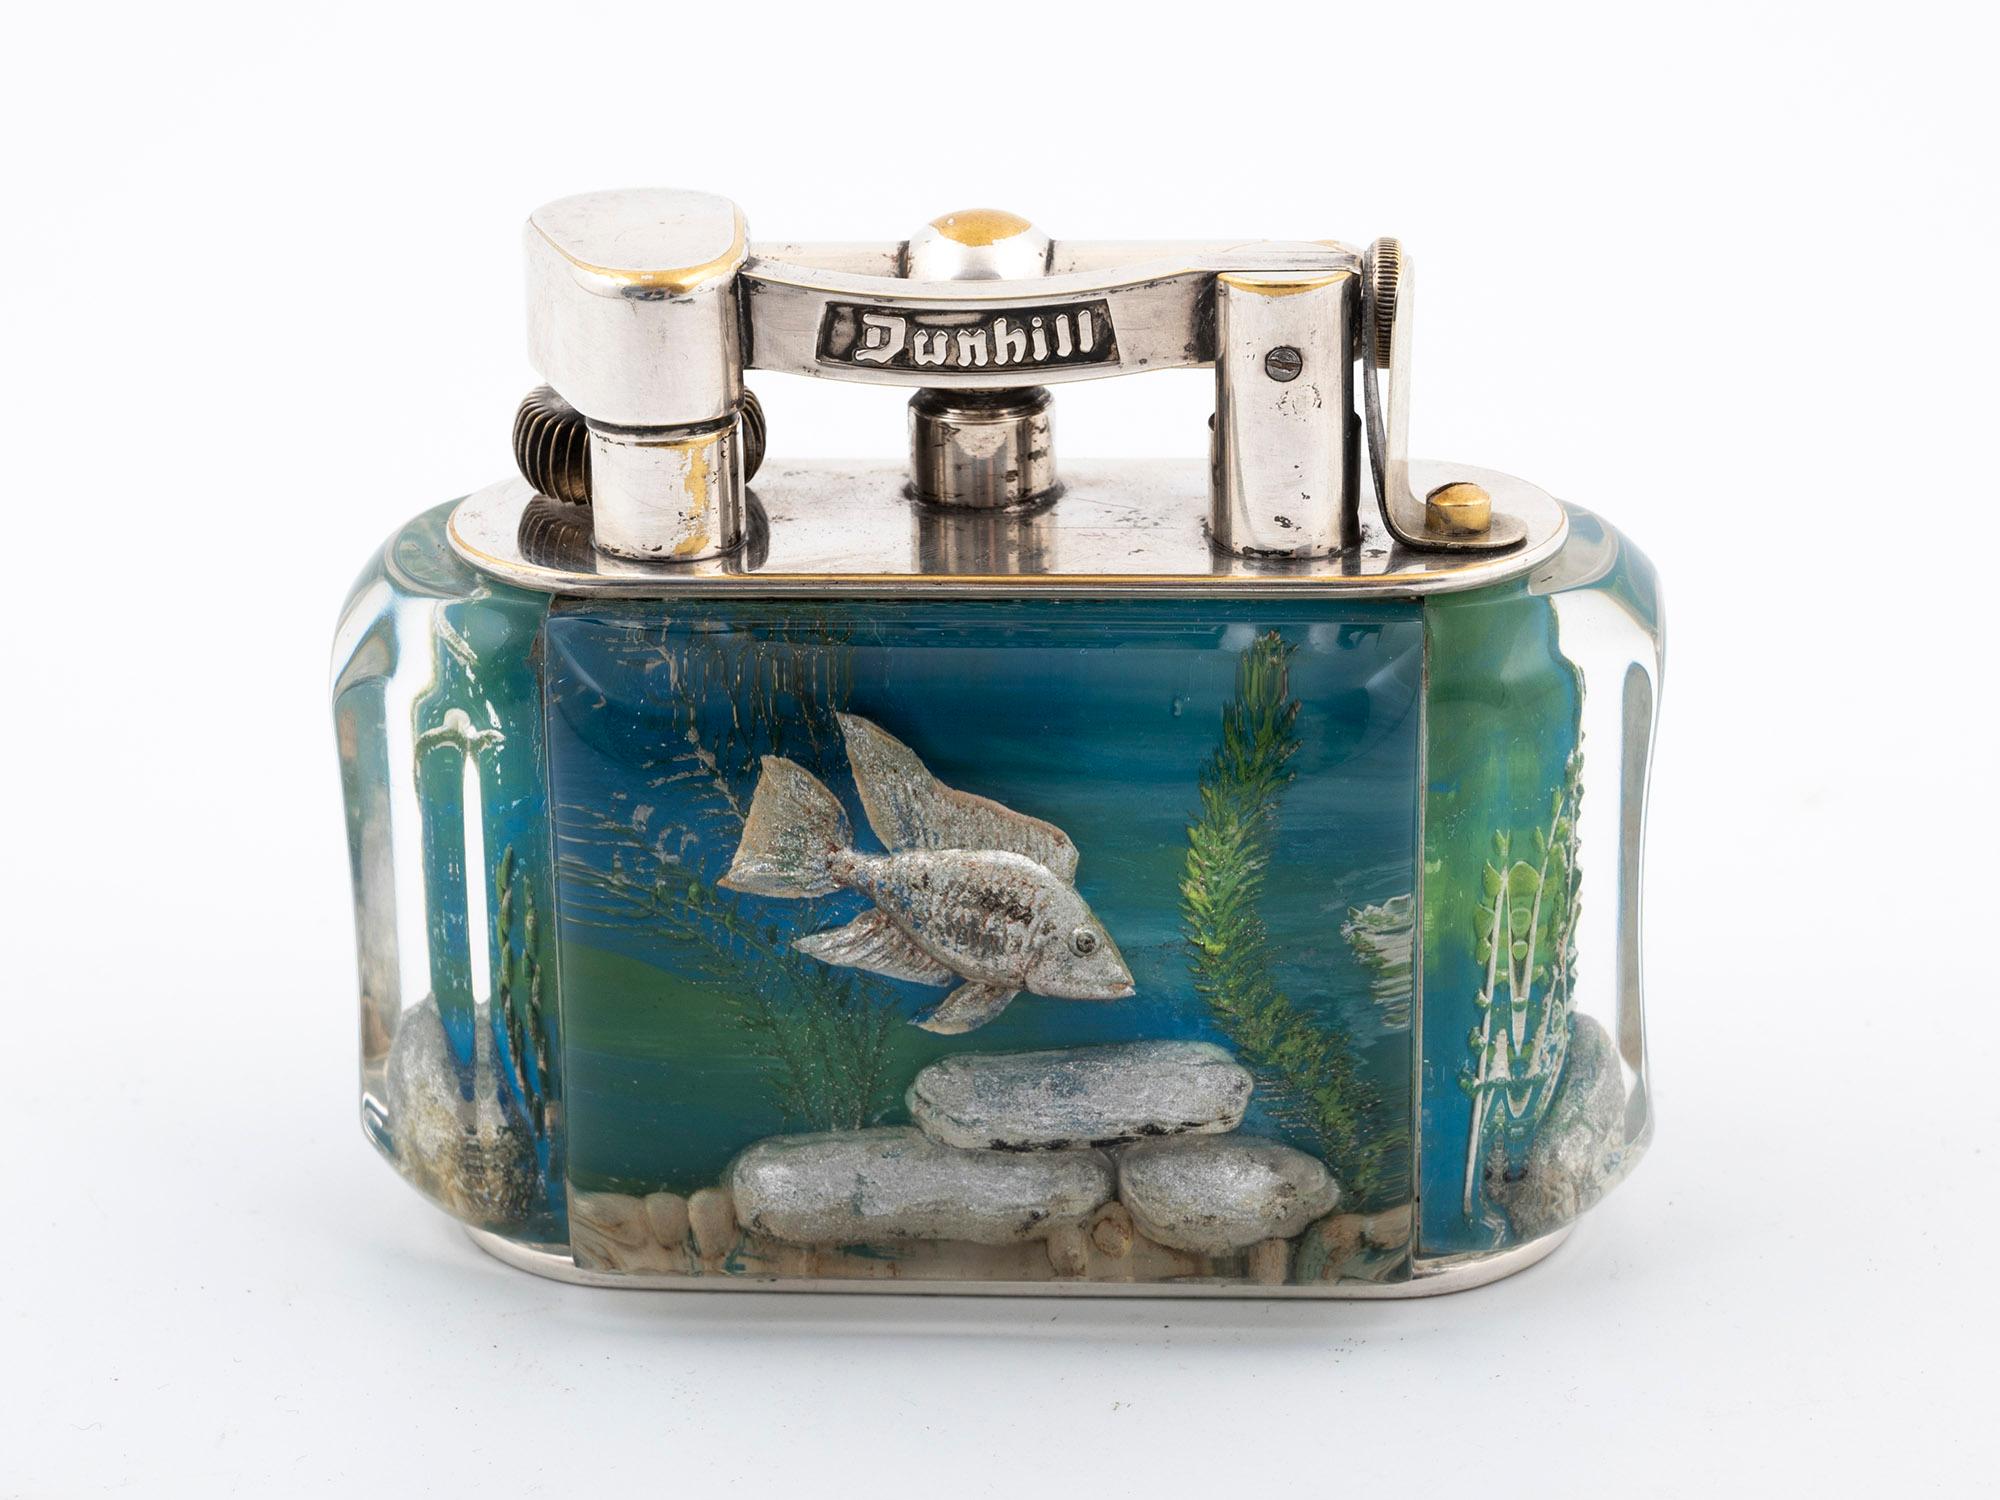 Here, we have an Aquarium Silver-plated Table Cigarette Lighter by Alfred Dunhill.

This 